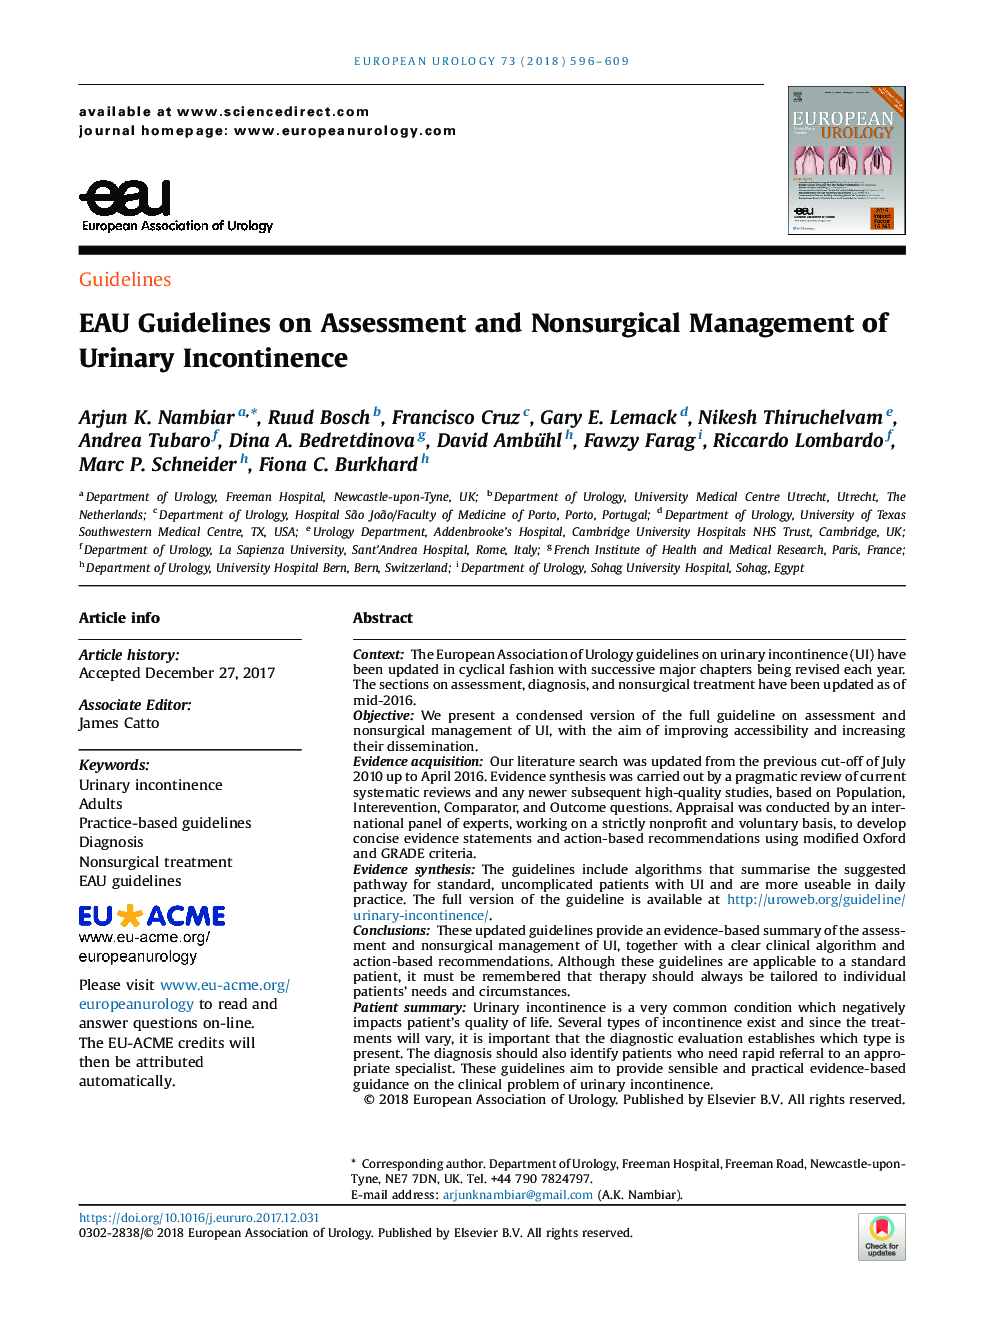 EAU Guidelines on Assessment and Nonsurgical Management of Urinary Incontinence